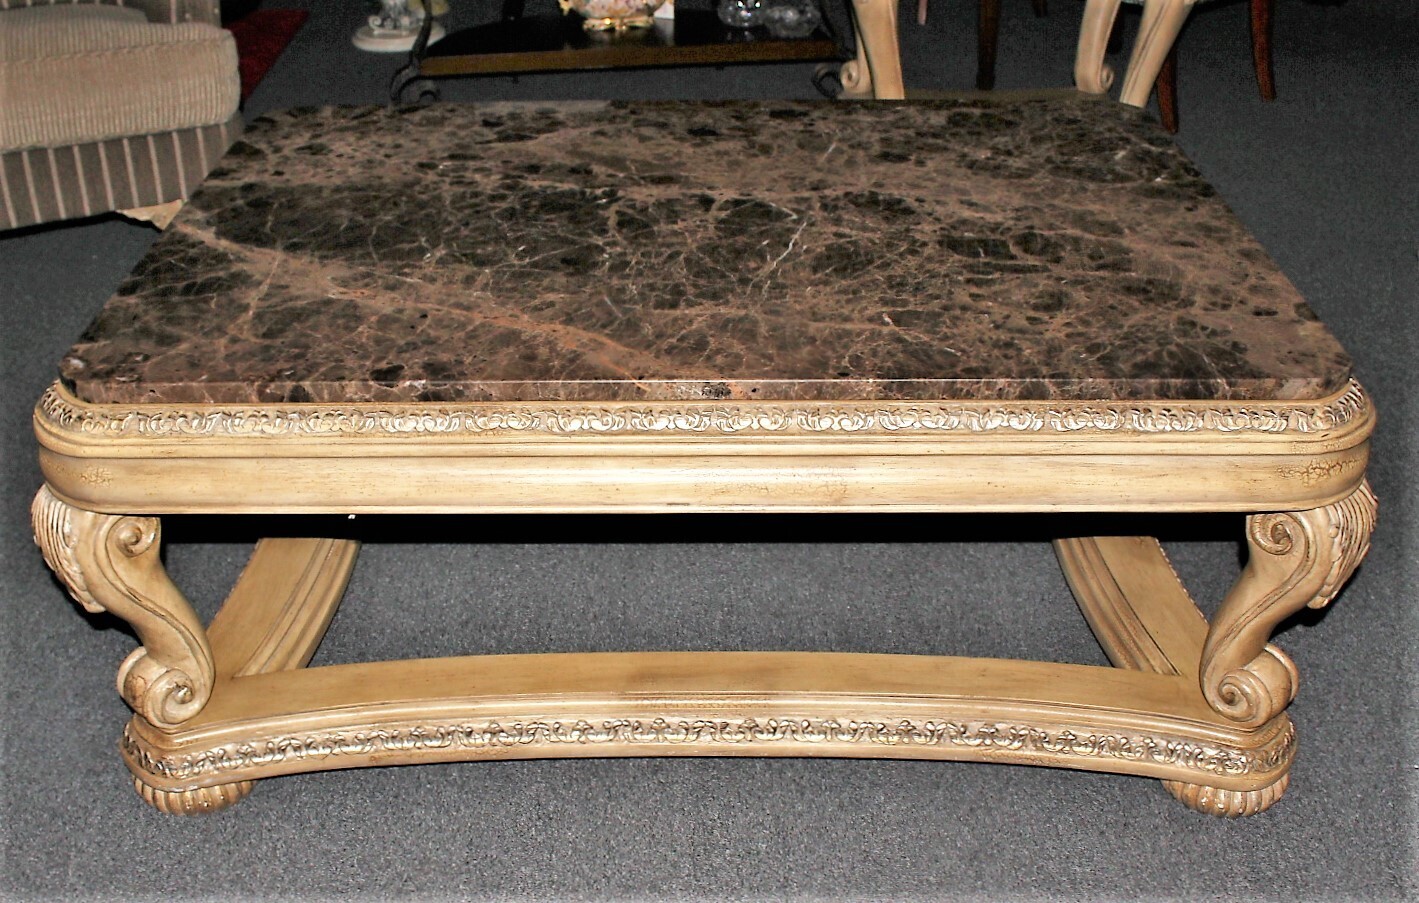 Schnadig Empire Collection Marble Top Ornately Carved Rectangular Coffee Table